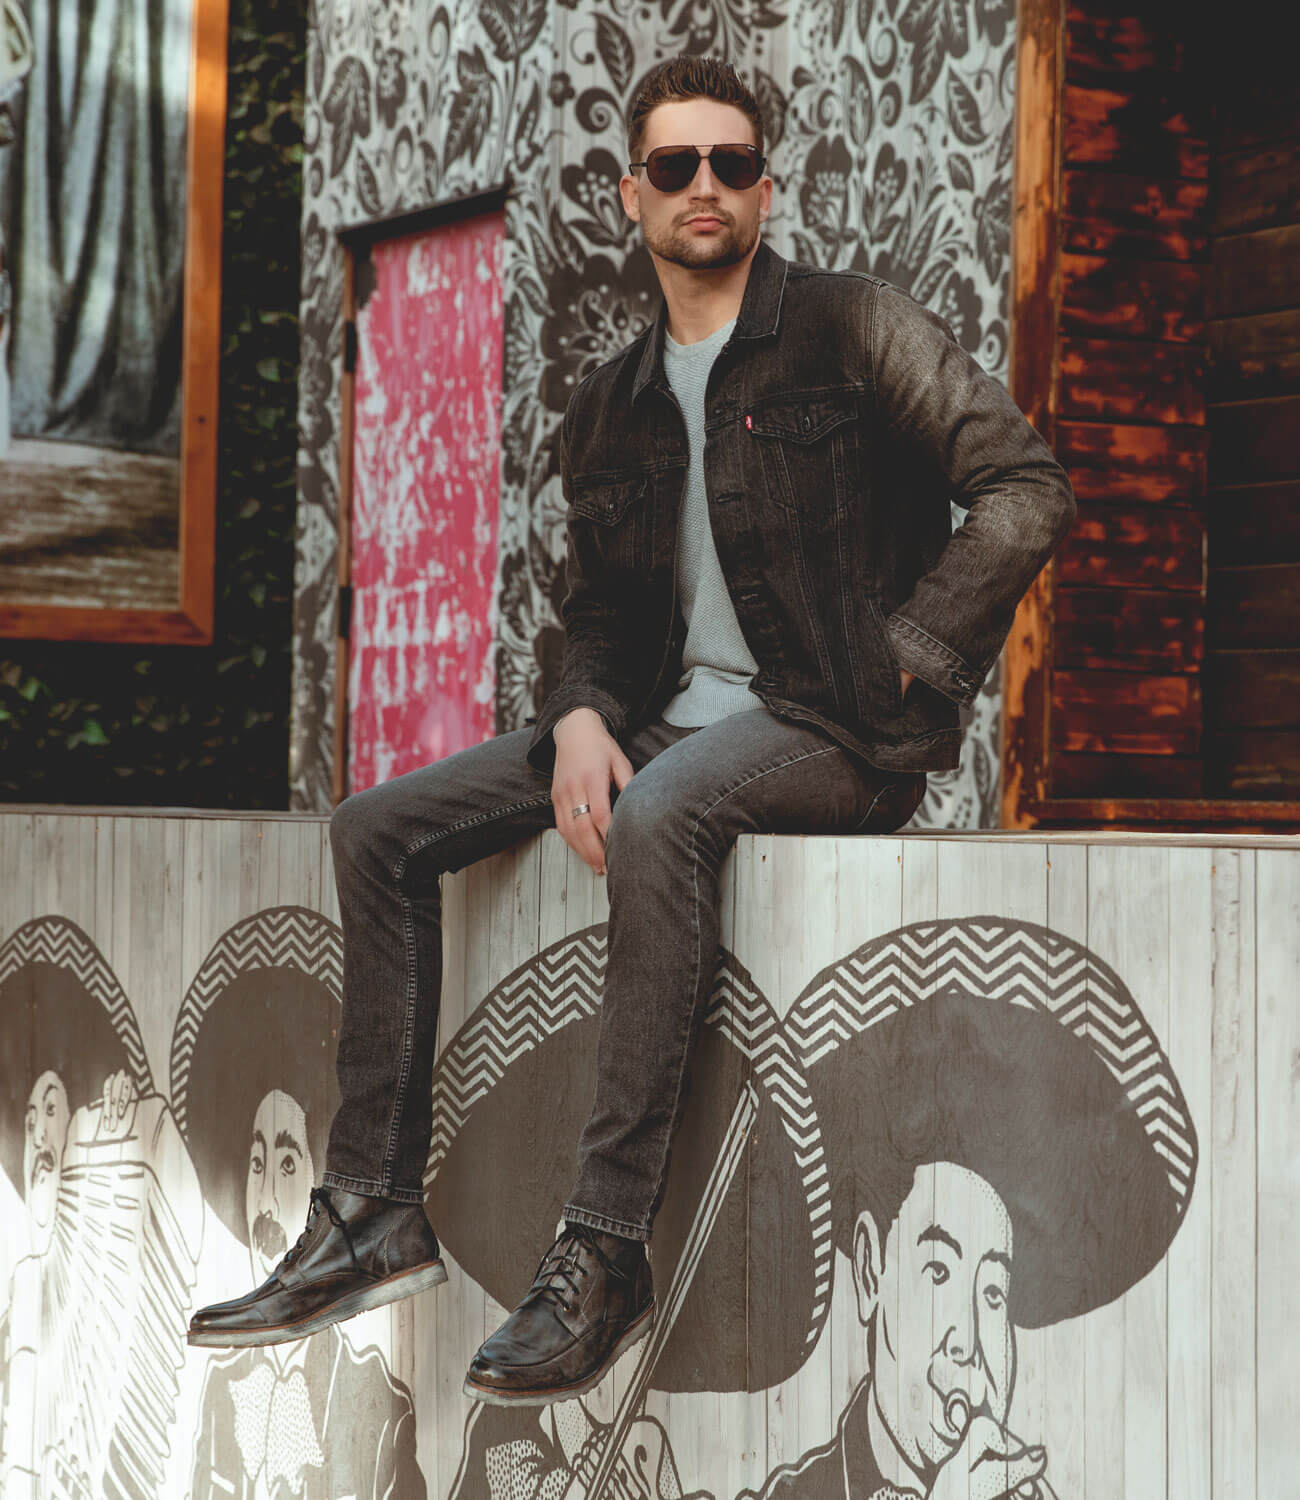 Man in sunglasses, denim jacket, and Bed Stu Lincoln work boots sitting on a wooden ledge in front of a wall with illustrated sombrero-wearing figures.